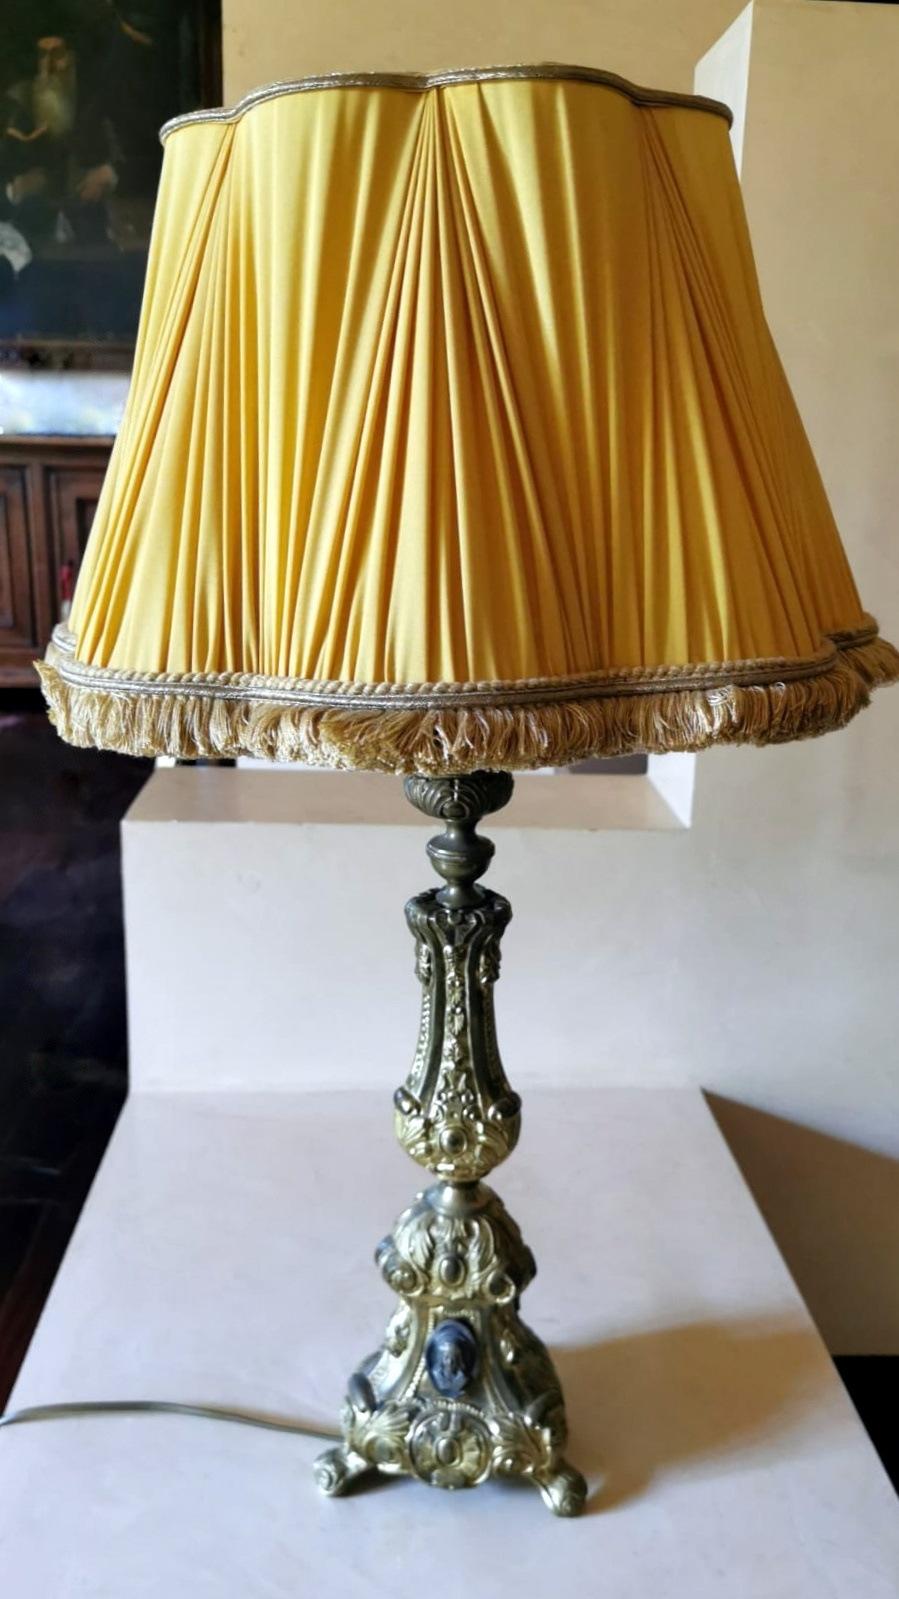 We kindly suggest you read the whole description, because with it we try to give you detailed technical and historical information to guarantee the authenticity of our objects.
Original table lamp obtained by electrifying an exceptional church